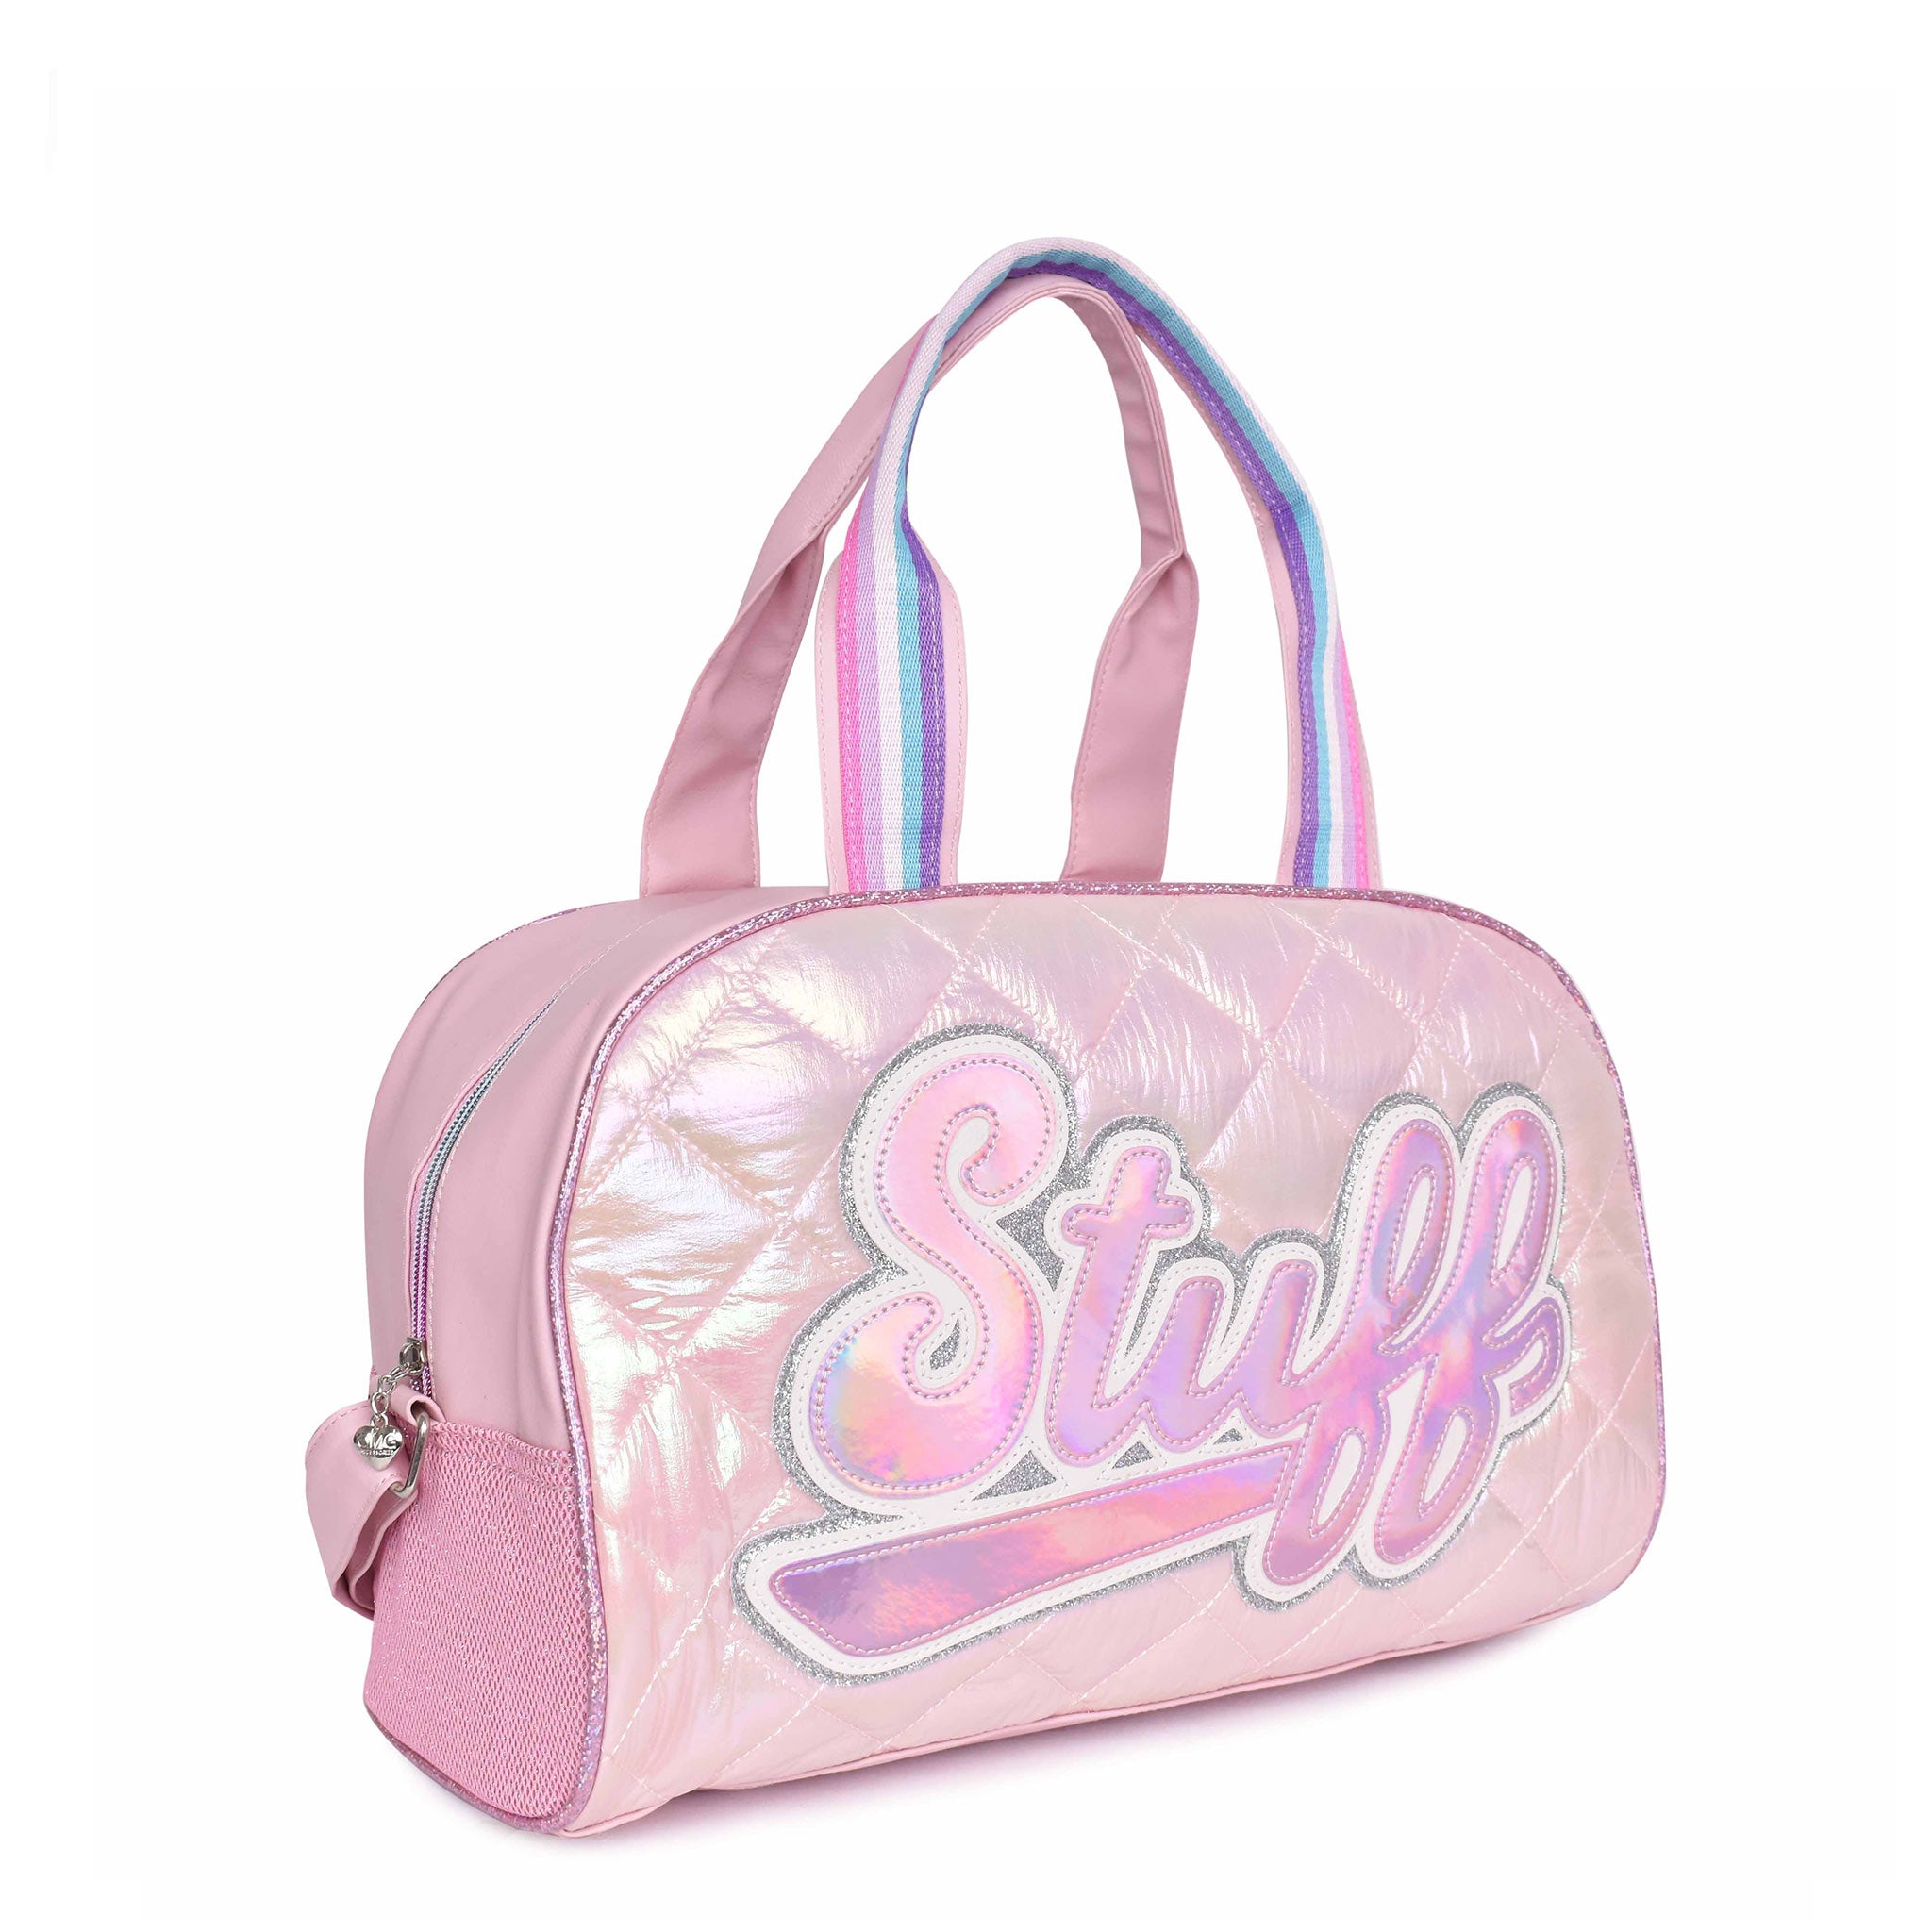 Side view of pastel pink metallic puffer medium duffle bag with retro 'Stuff' patch